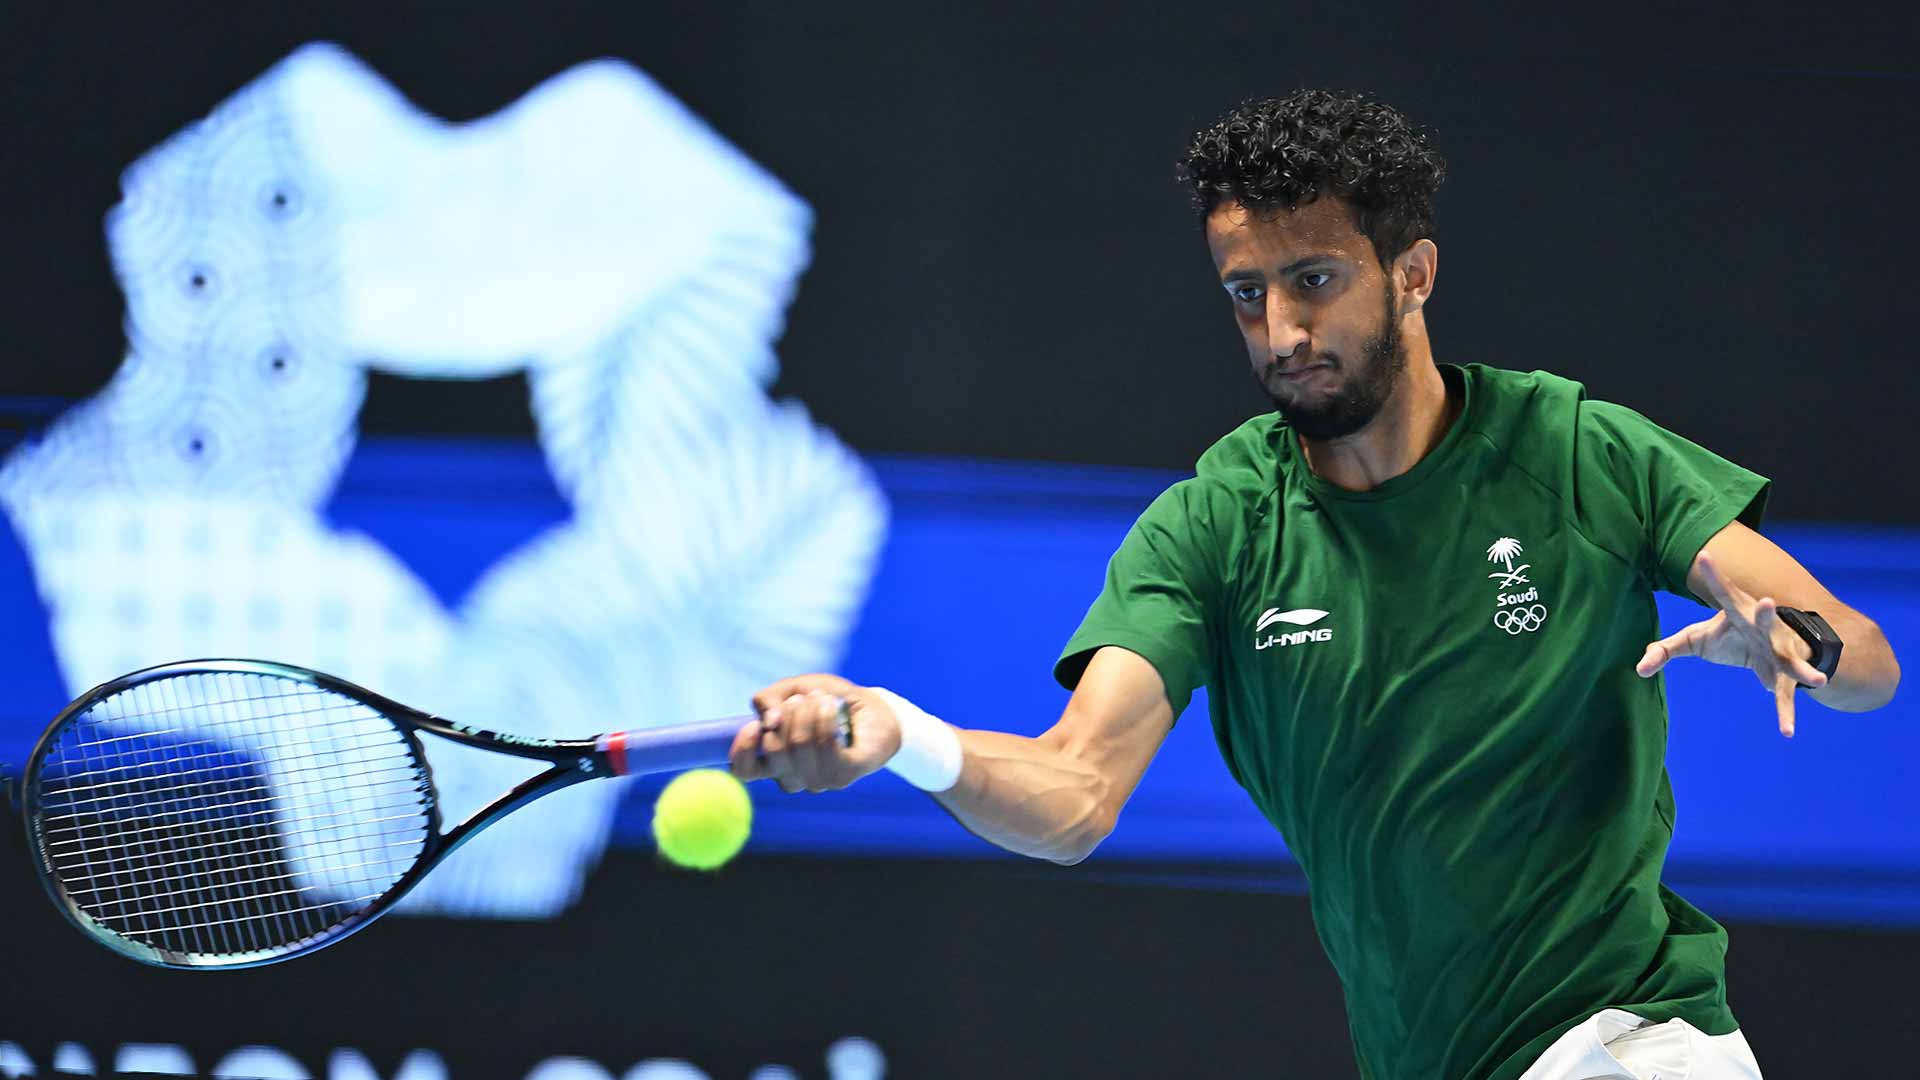 Ammar Alhogbani during practice this week at the Next Gen ATP Finals presented by NEOM.